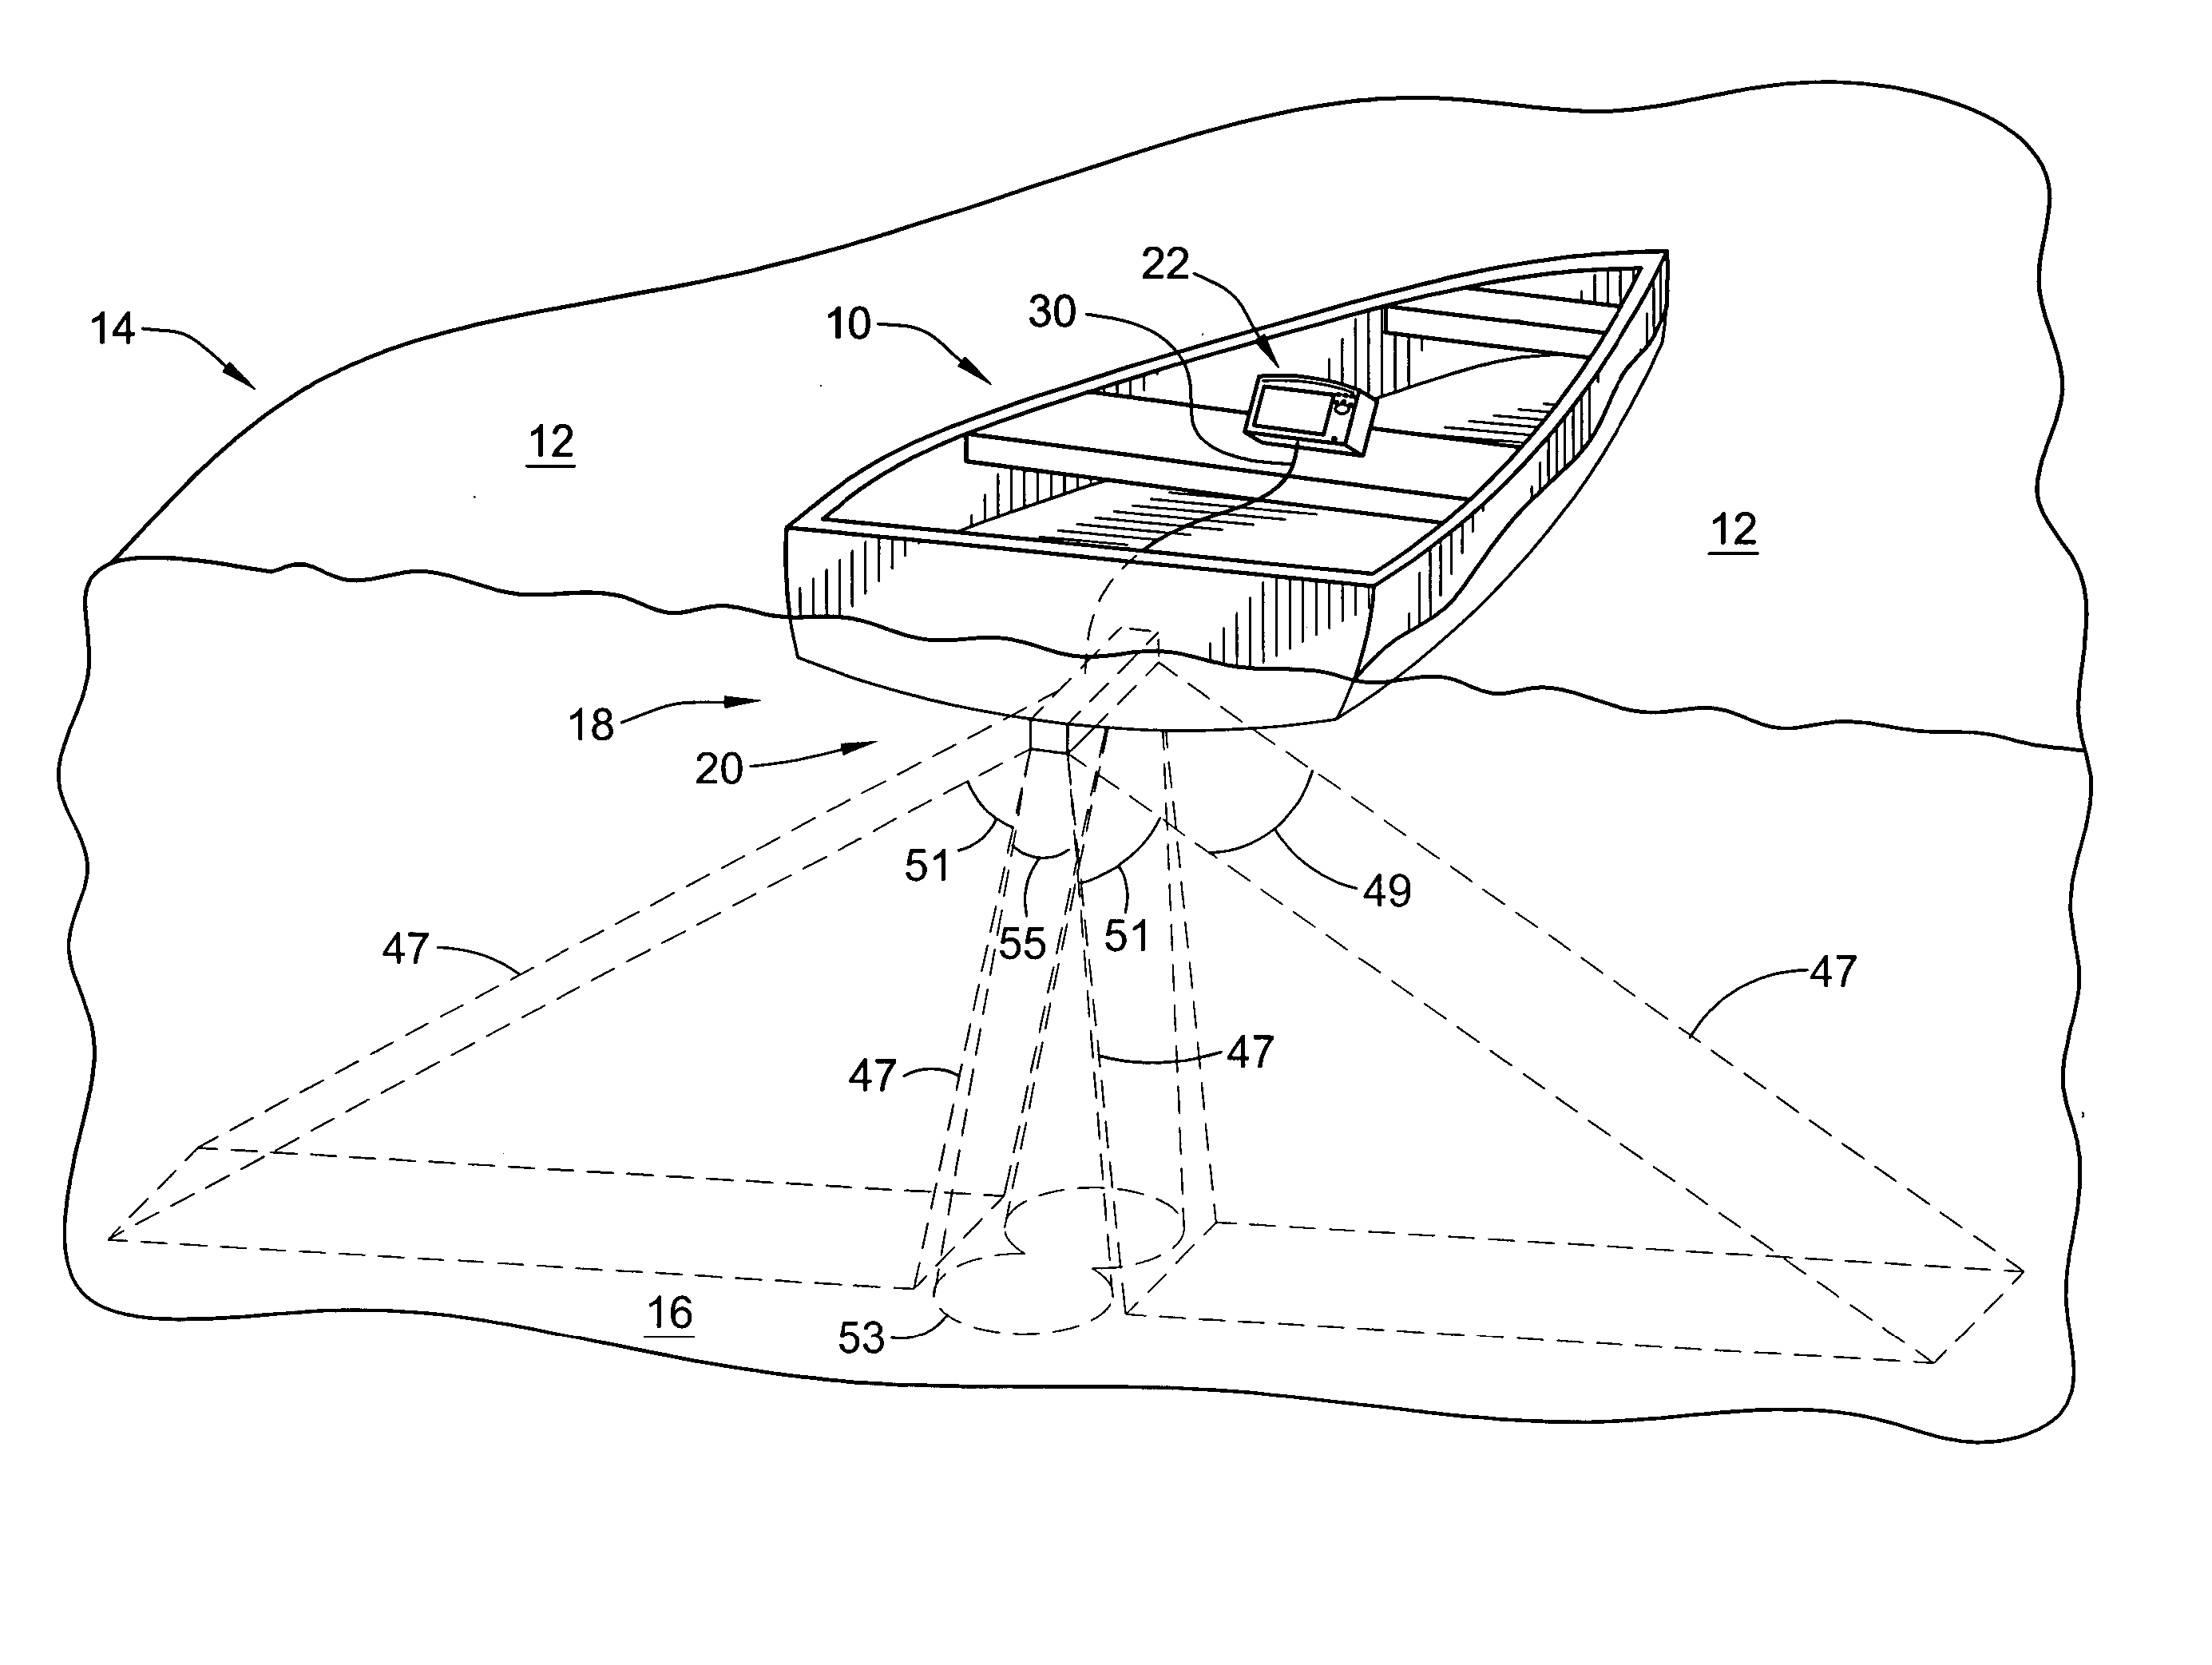 Sonar imaging system for mounting to watercraft